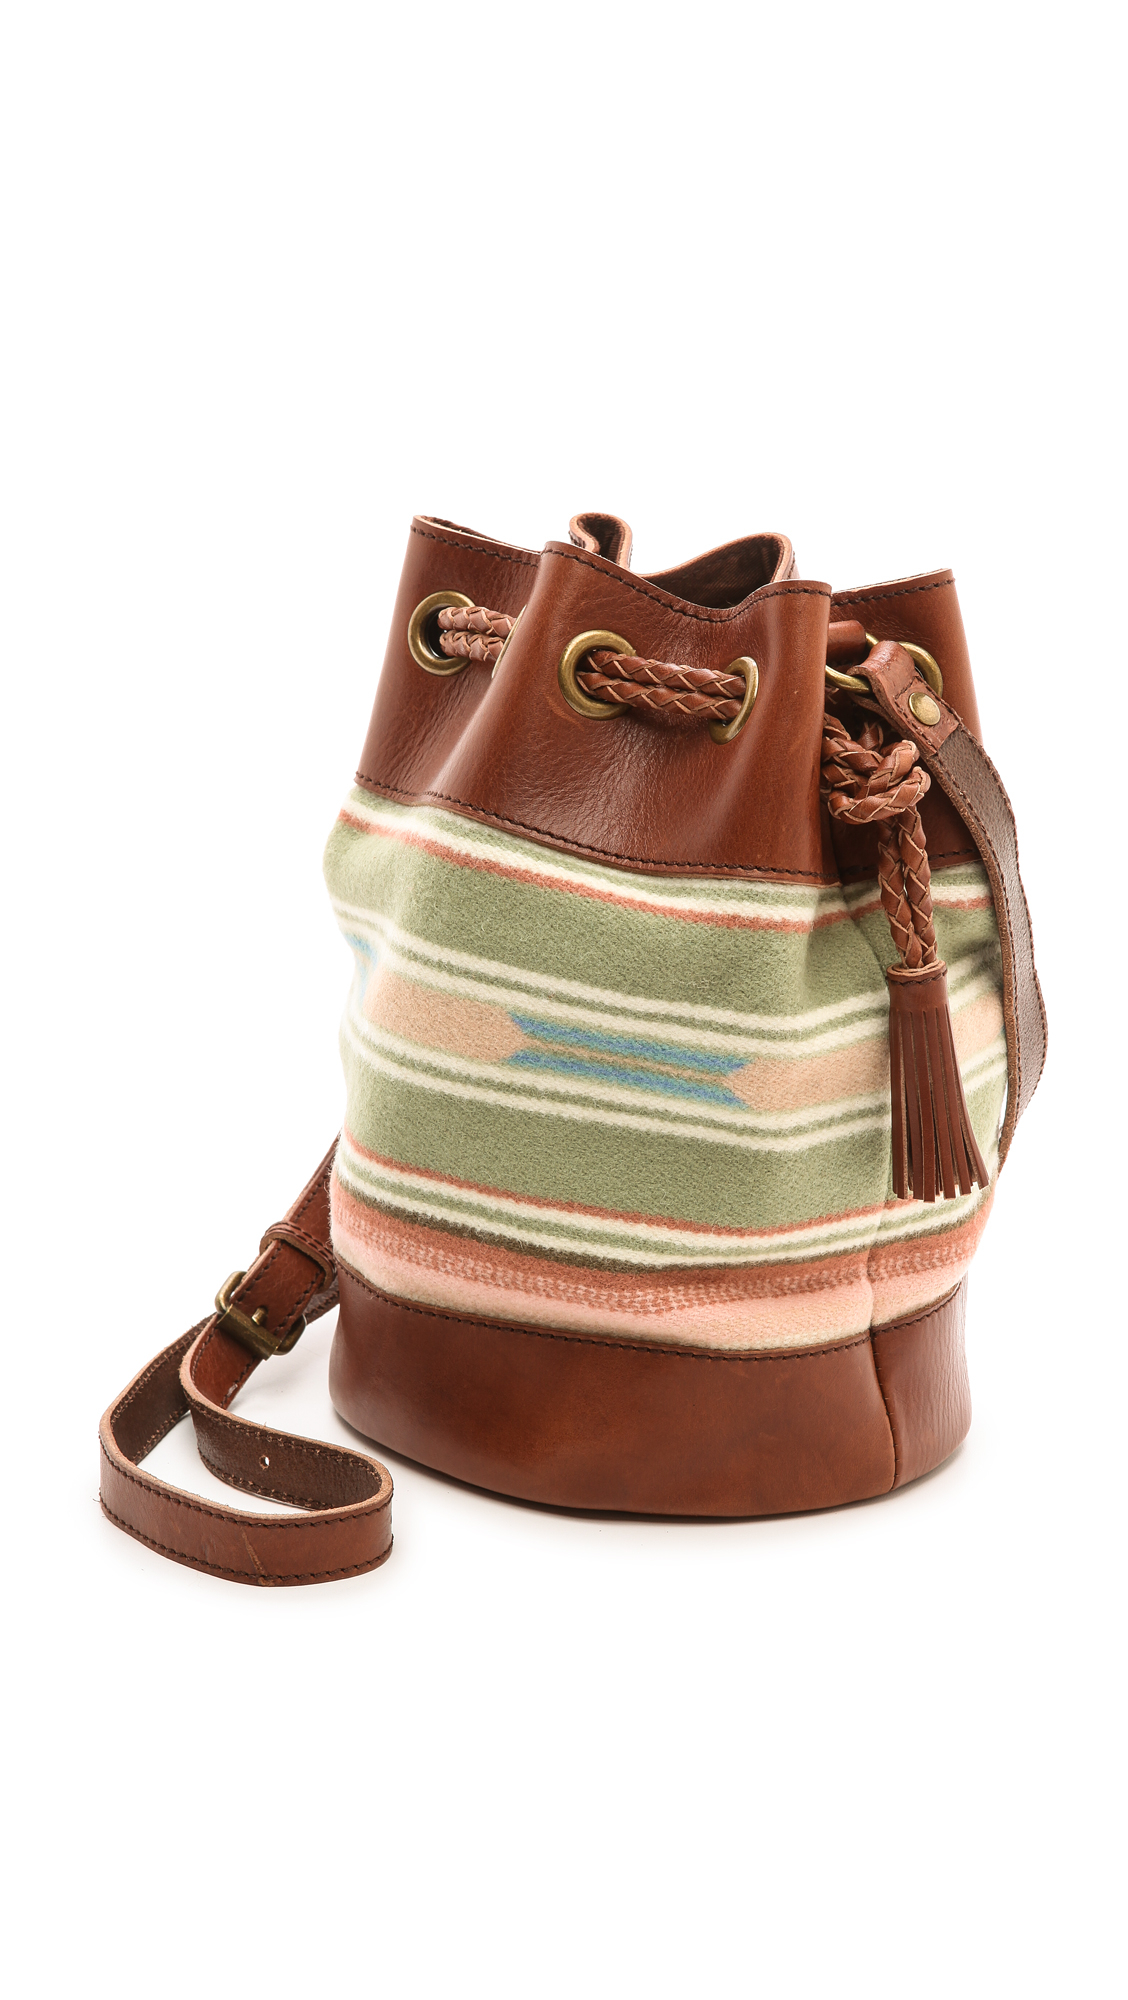 Lyst - Pendleton Small Bucket Bag Agave Stripe in Brown